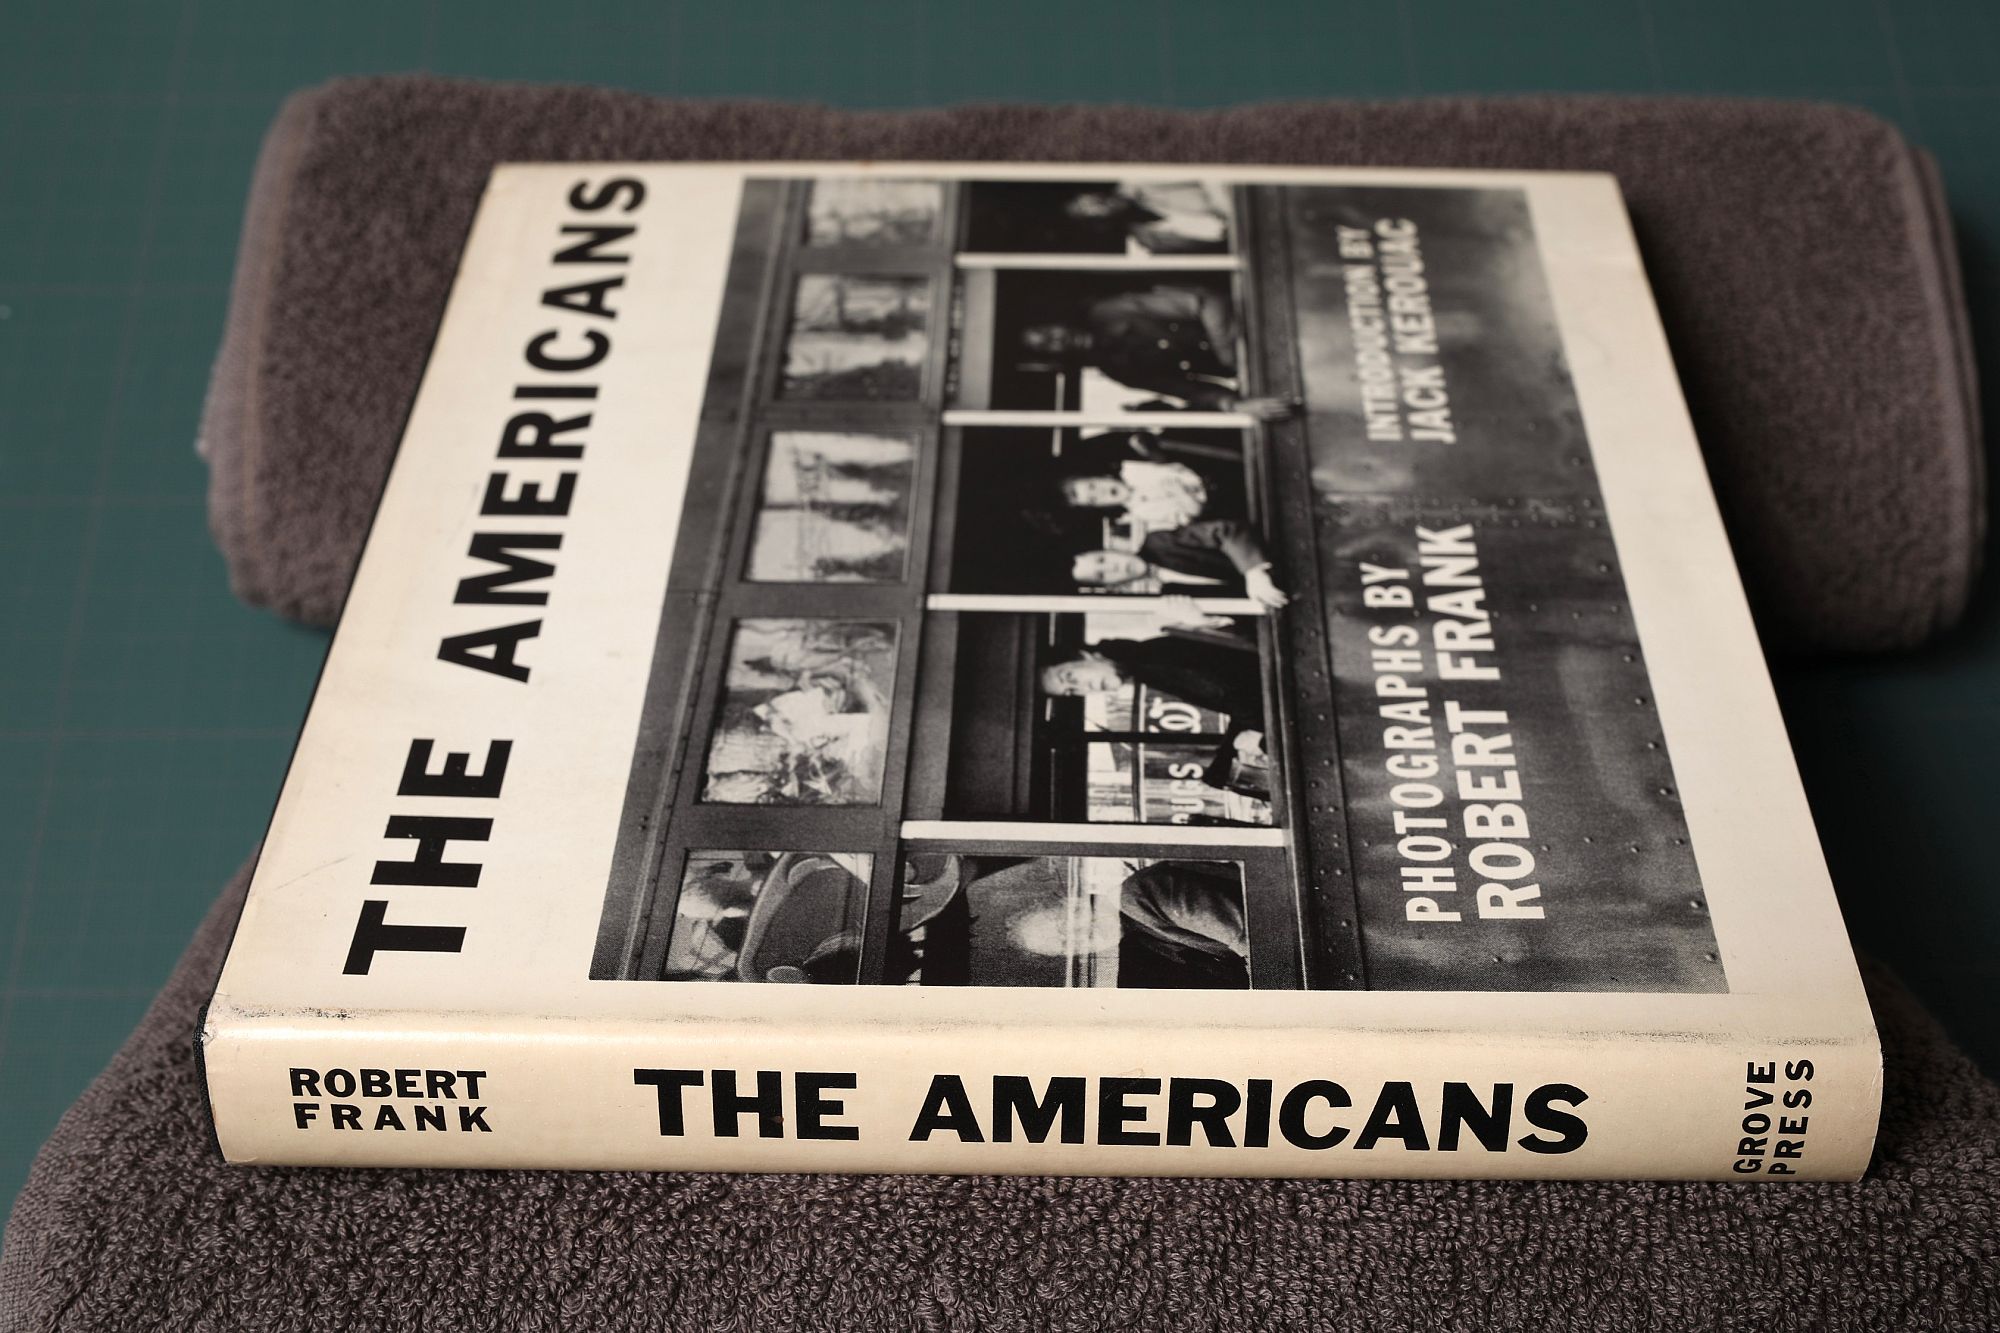 Robert Frank: The Americans (First American Edition, Grove Press, 1959) [SIGNED]